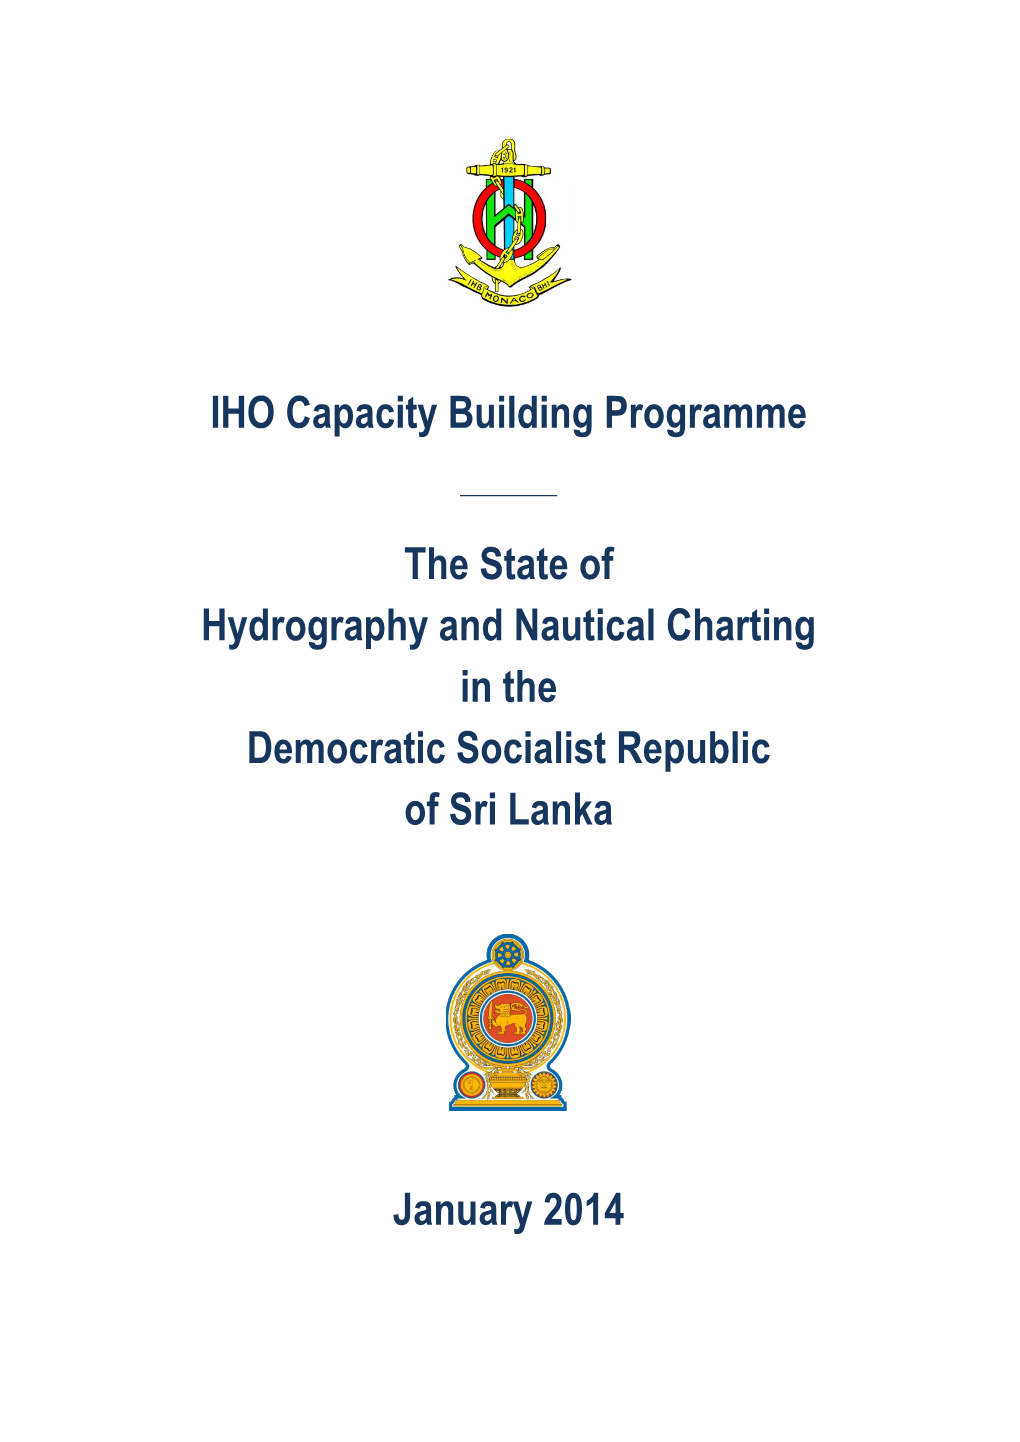 IHO Capacity Building Programme the State of Hydrography and Nautical Charting in the Democratic Socialist Republic of Sri Lanka